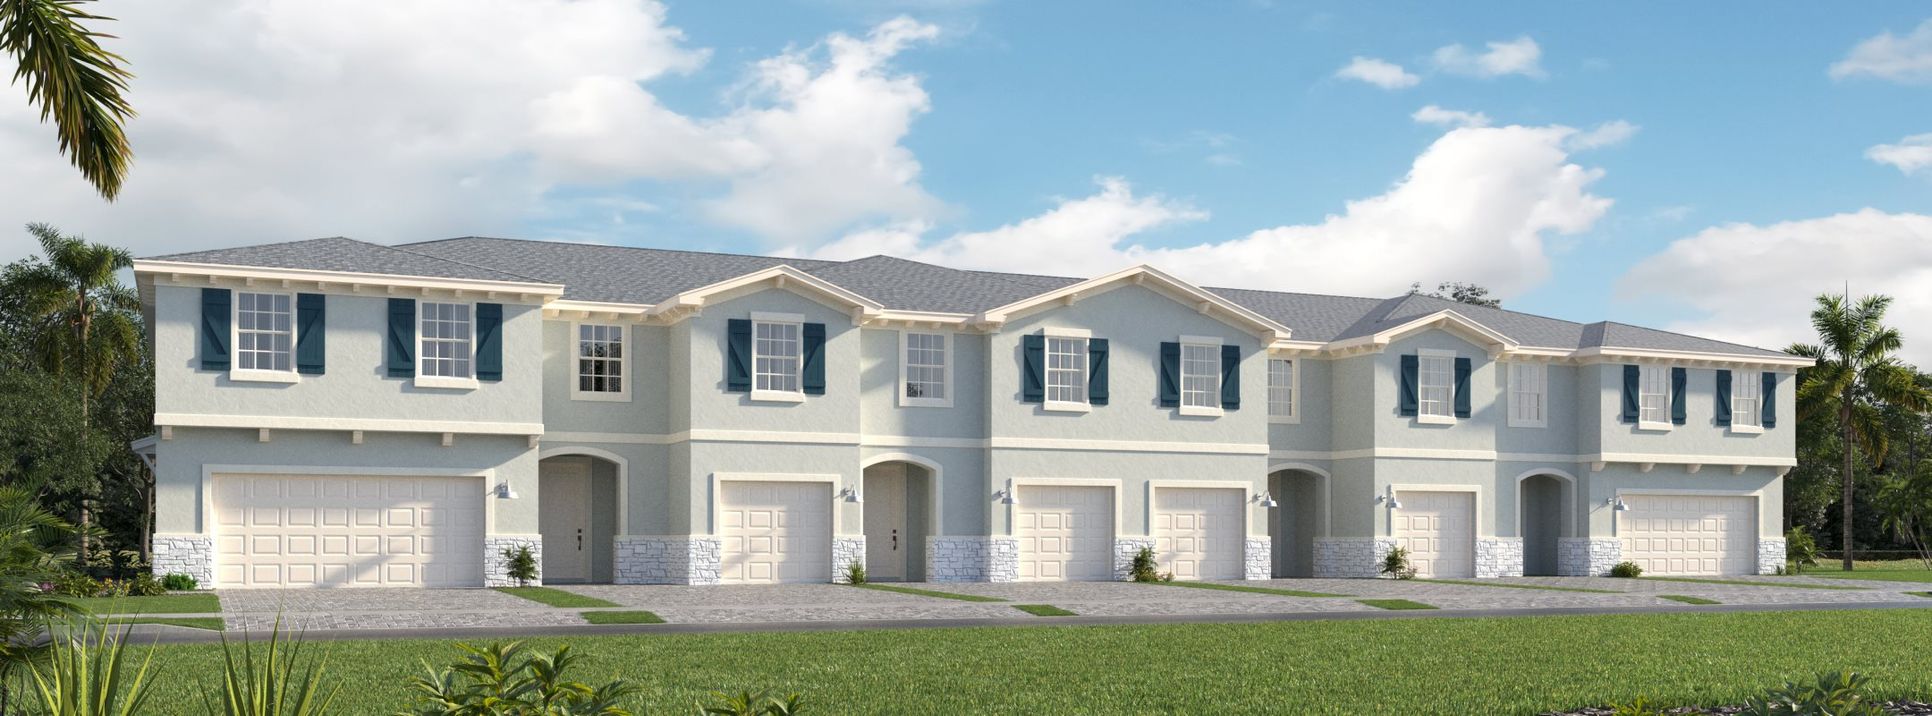 Lakeshore at the fountains townhome rendering